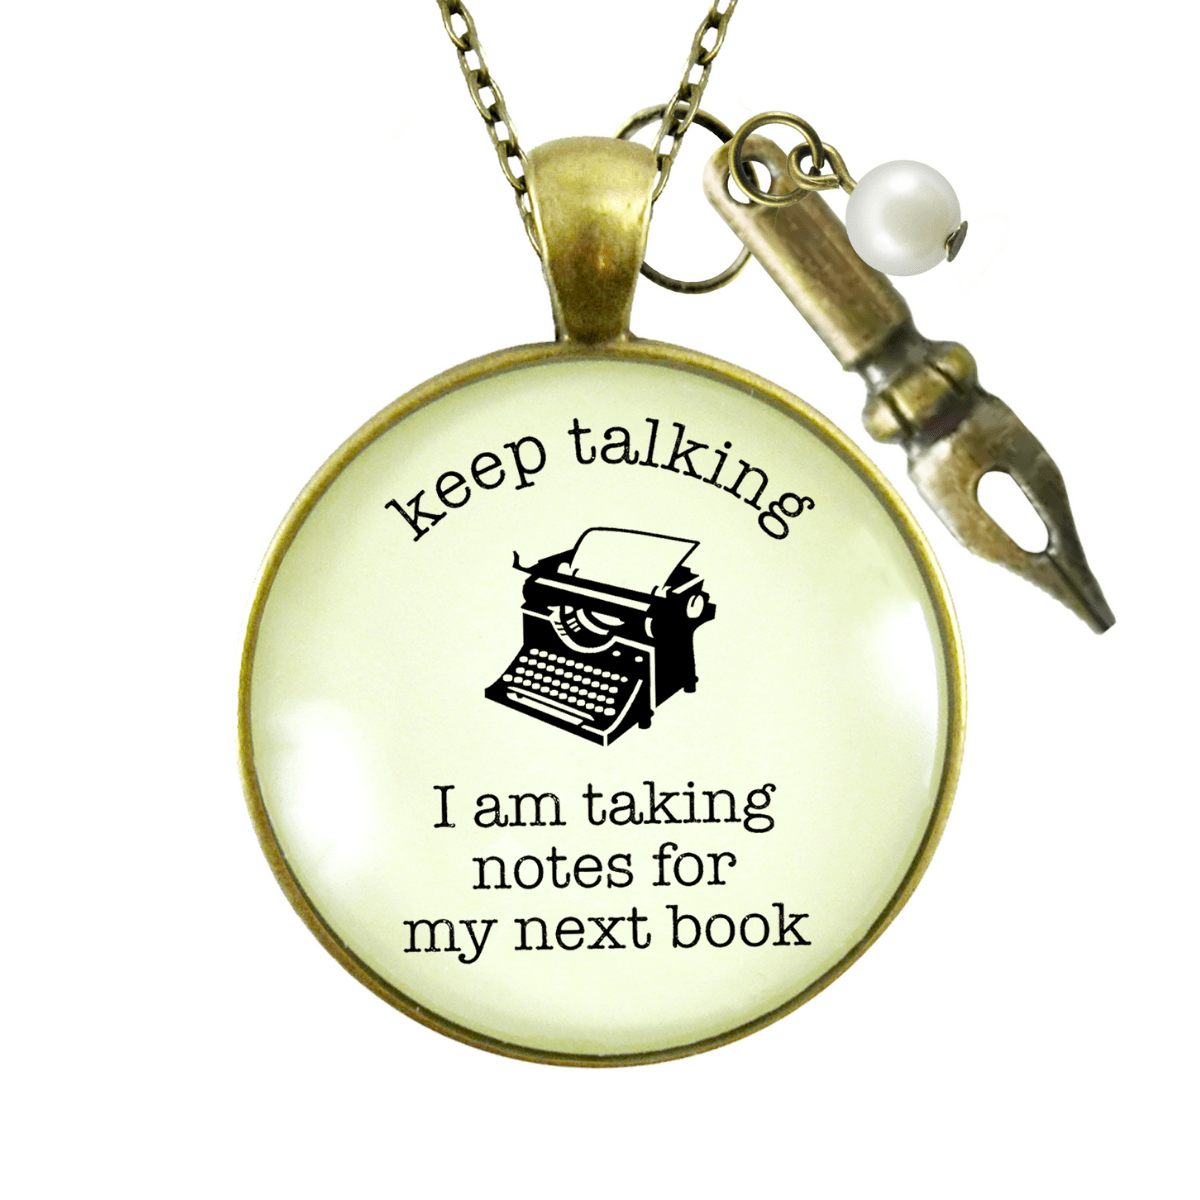 Gutsy Goodness Author Necklace Keep Talking Taking Notes Book Jewelry Writers Quote - Gutsy Goodness;Author Necklace Keep Talking Taking Notes Book Jewelry Writers Quote - Gutsy Goodness Handmade Jewelry Gifts